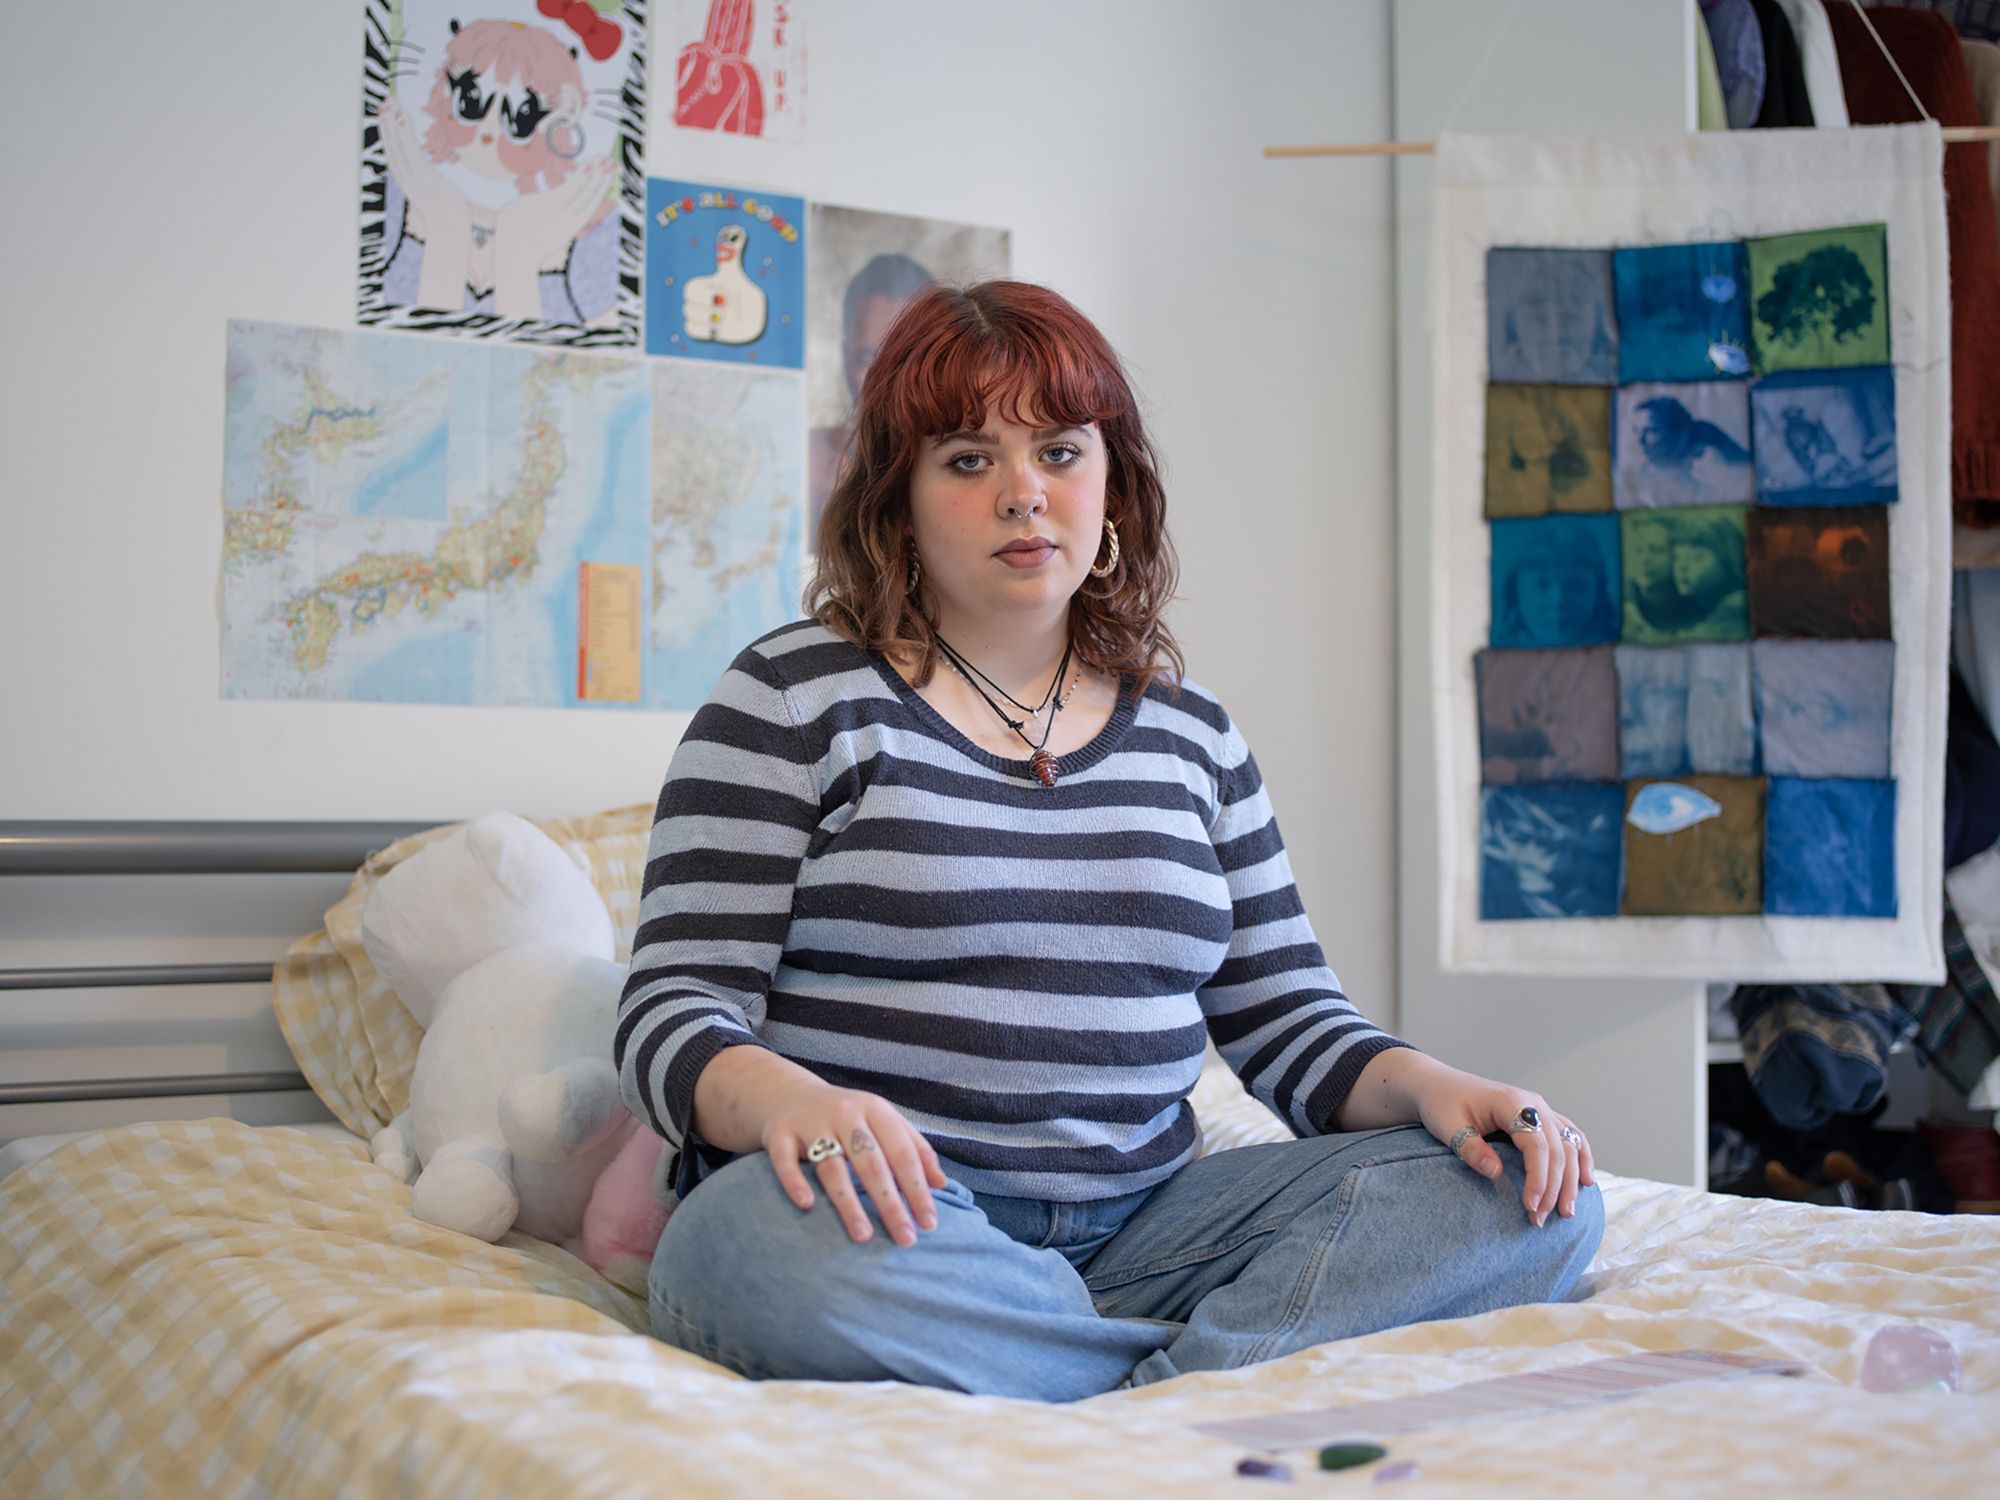 BA Photography work by Hannah Jayne showing a documentary style portrait of a woman sat on her bed, with tarot cards laid out in front of her, and a tapestry of her own making behind her.